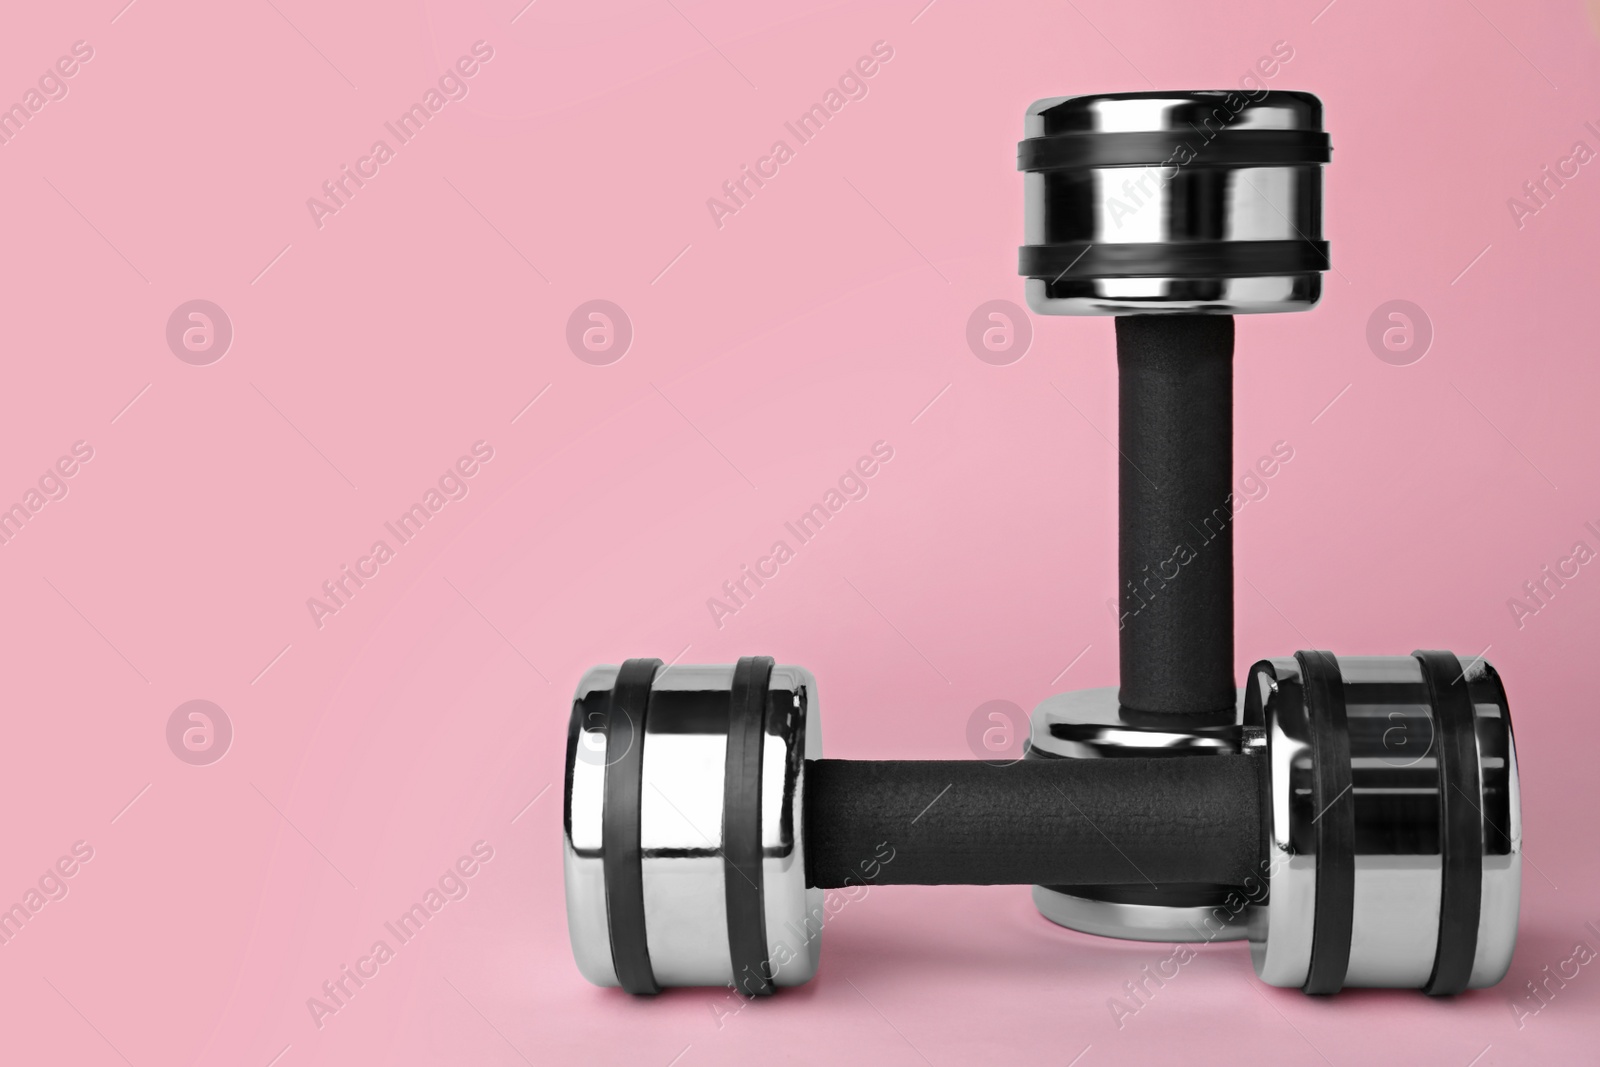 Photo of Two metal dumbbells on light pink background